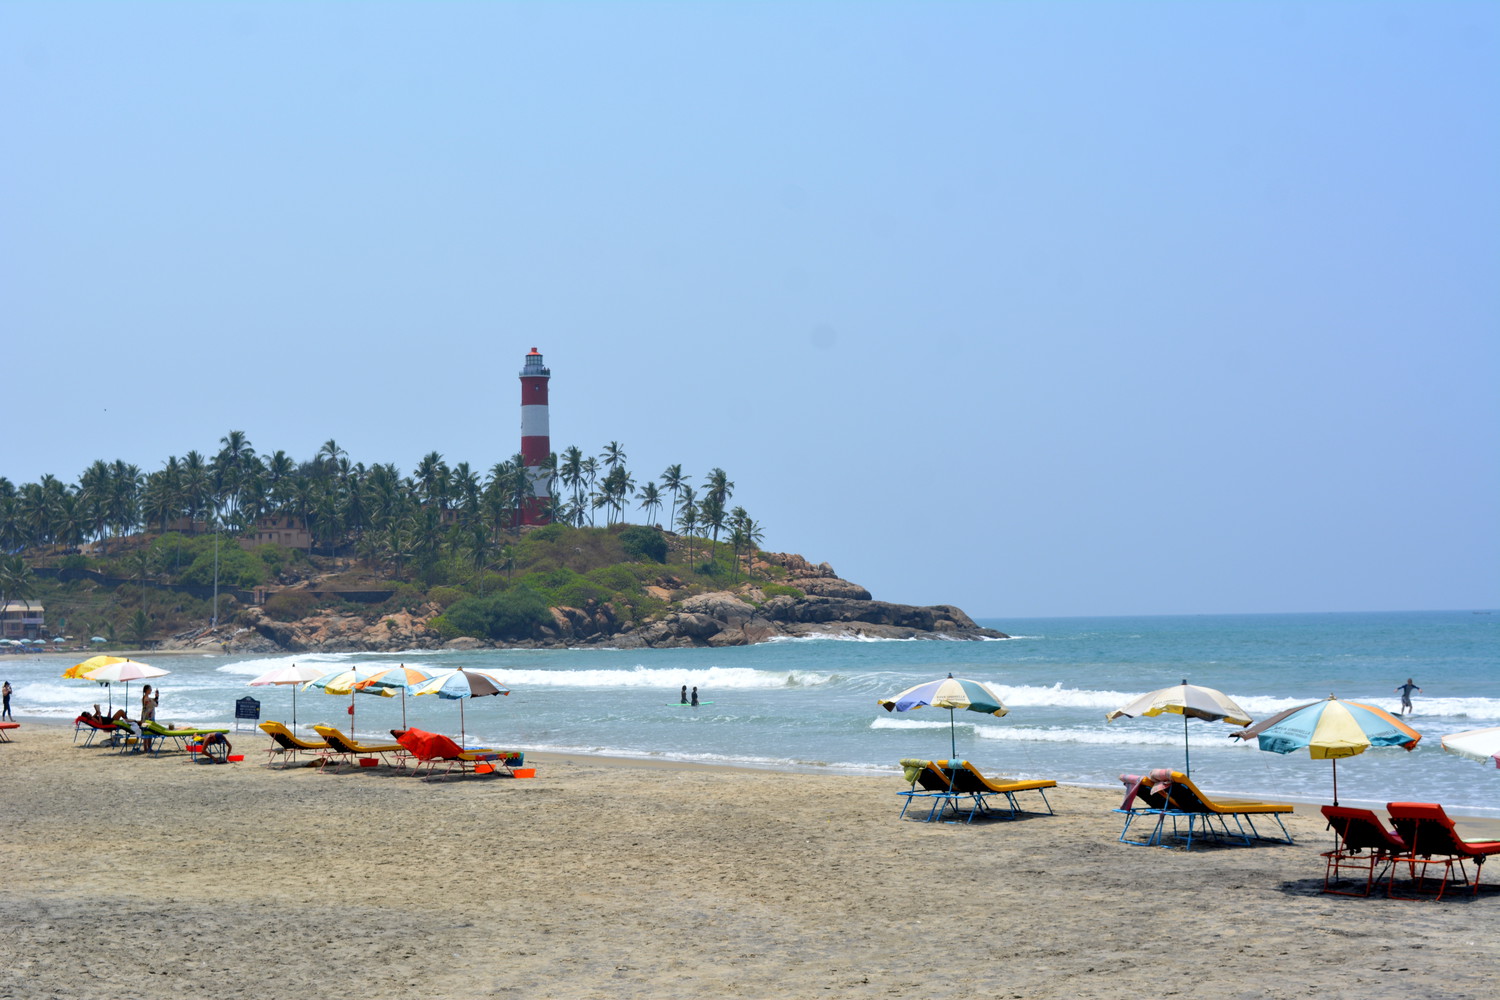 A crescent shaped beach lined with deckchairs and beach umbrellas, and a lighthouse surrounded by coconut palm trees on a hillock